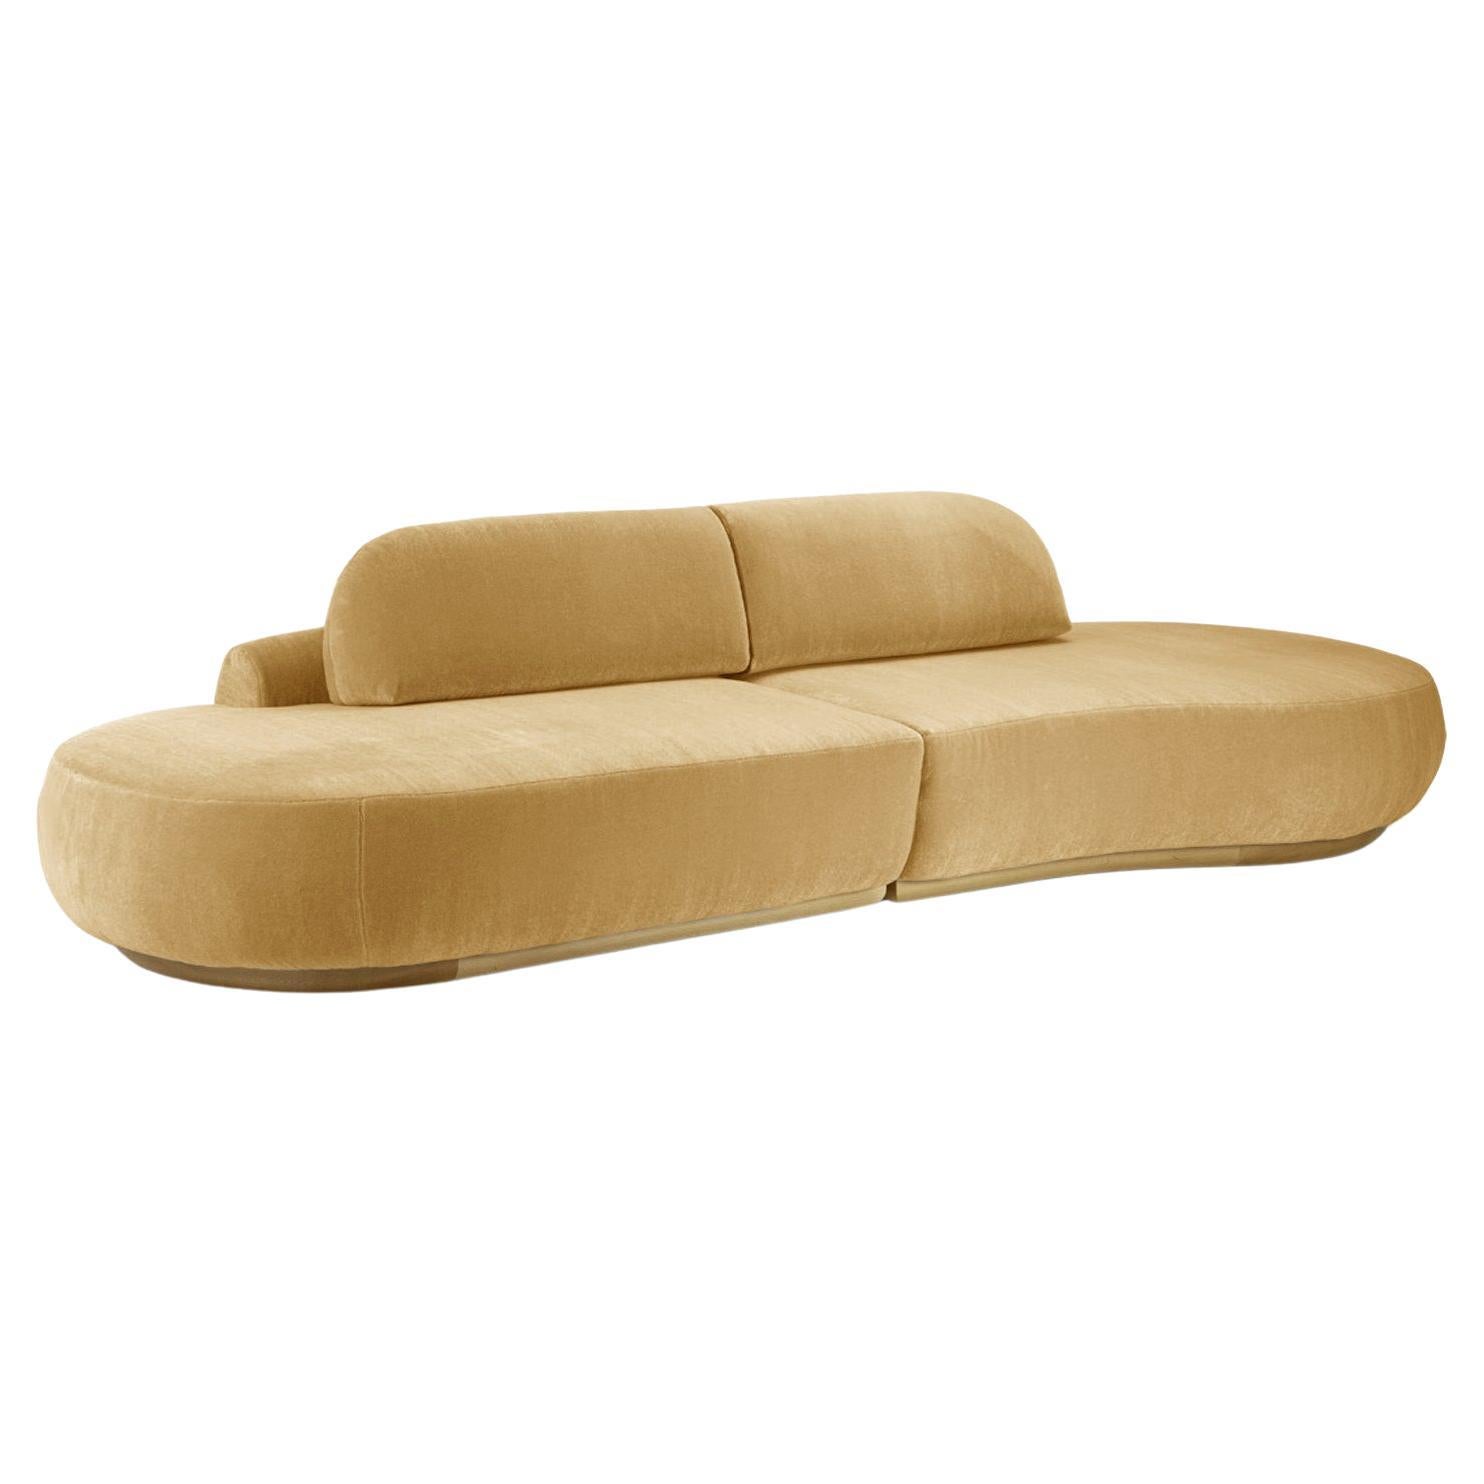 Naked Curved Sectional Sofa, 2 Piece with Natural Oak and Vigo Plantain For Sale